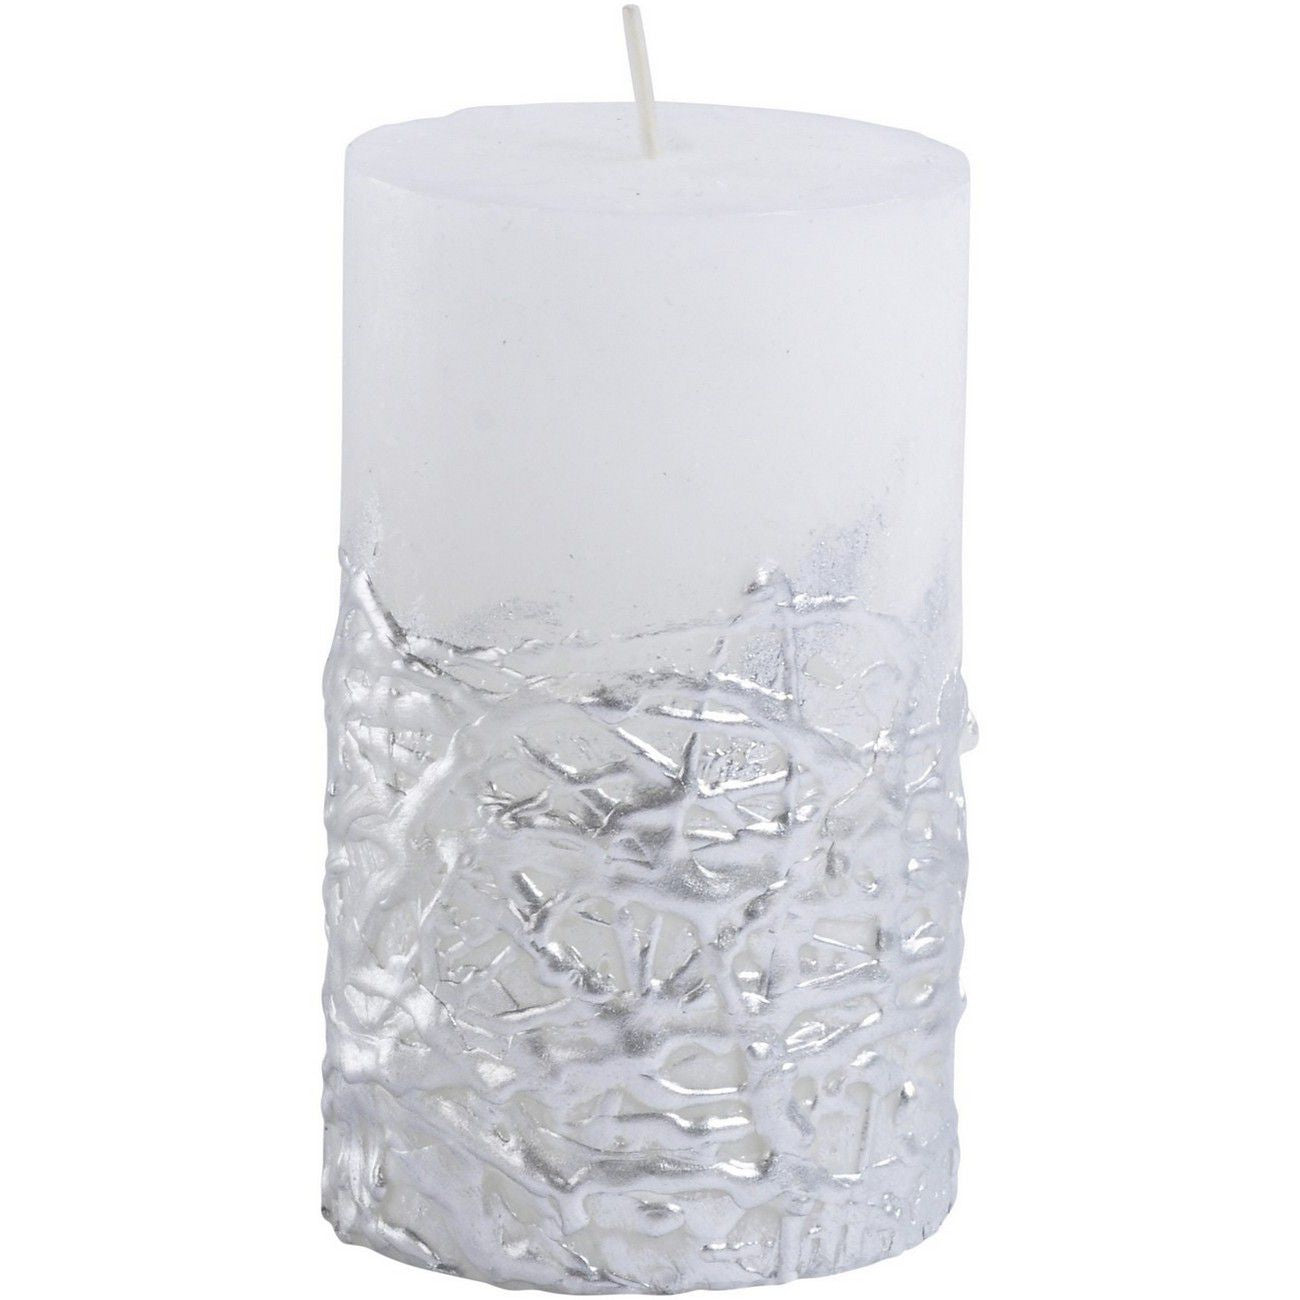 Libra White Candle With Textured Silver Base 7×12